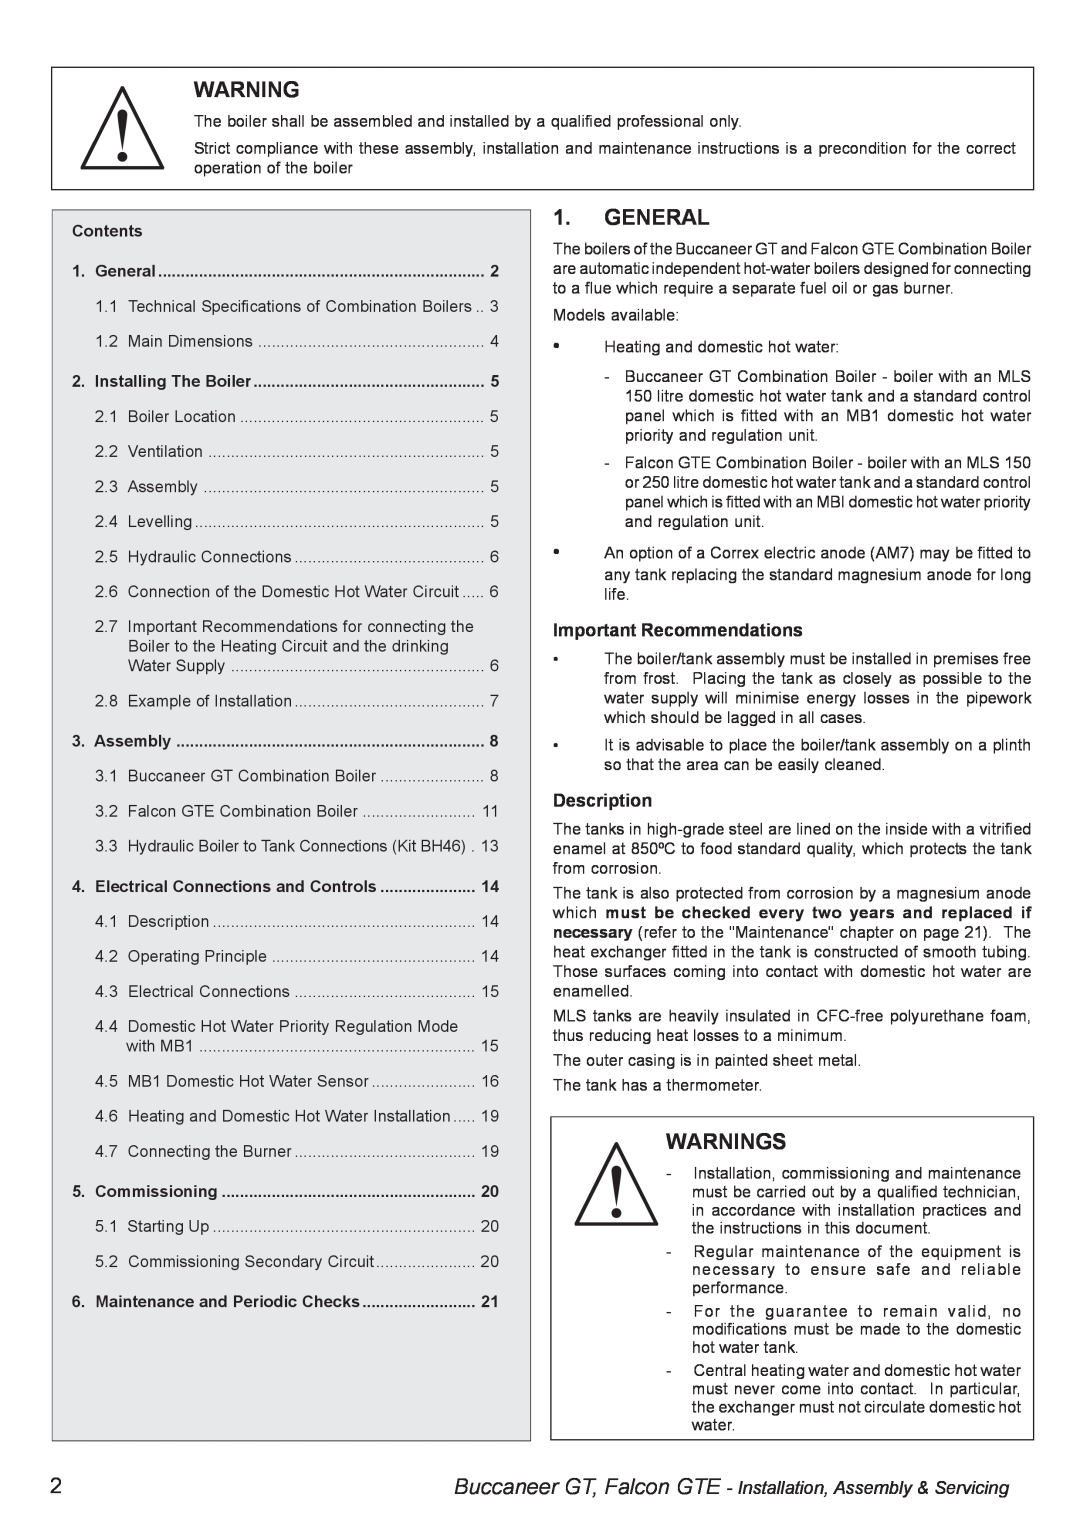 IDEAL INDUSTRIES BUC5034 manual General, Warnings, Important Recommendations, Description, Contents, Installing The Boiler 